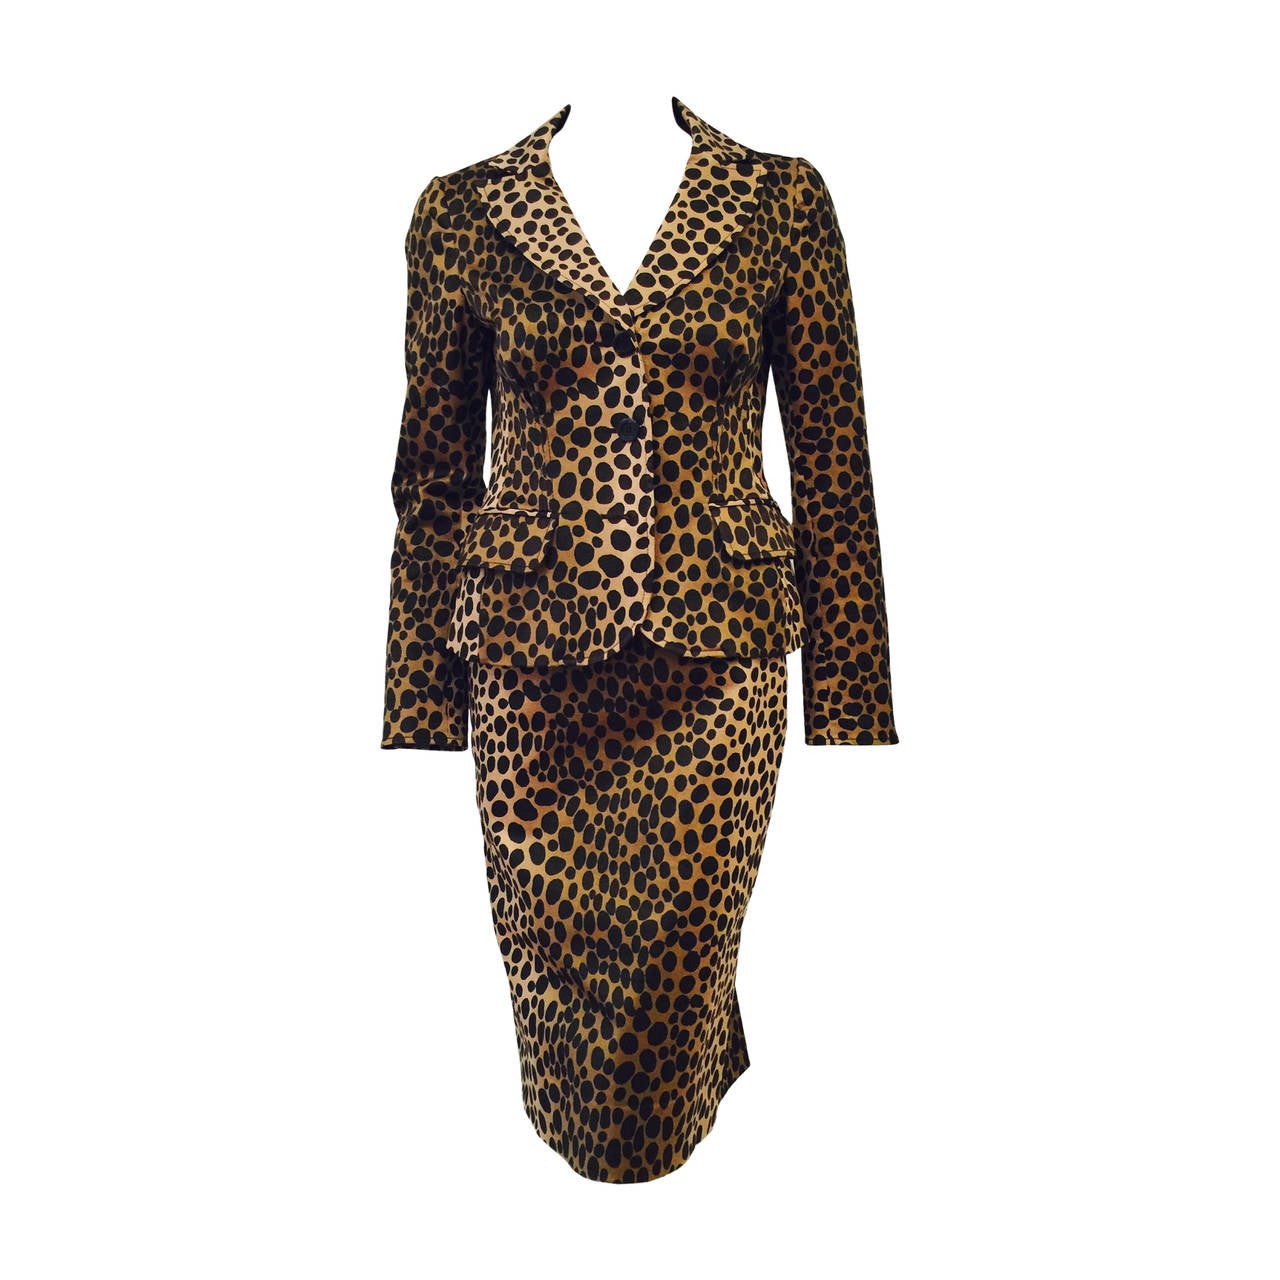 Magnificent Moschino Cheap and Chic Cotton Stretch Leopard Print Skirt Suit For Sale